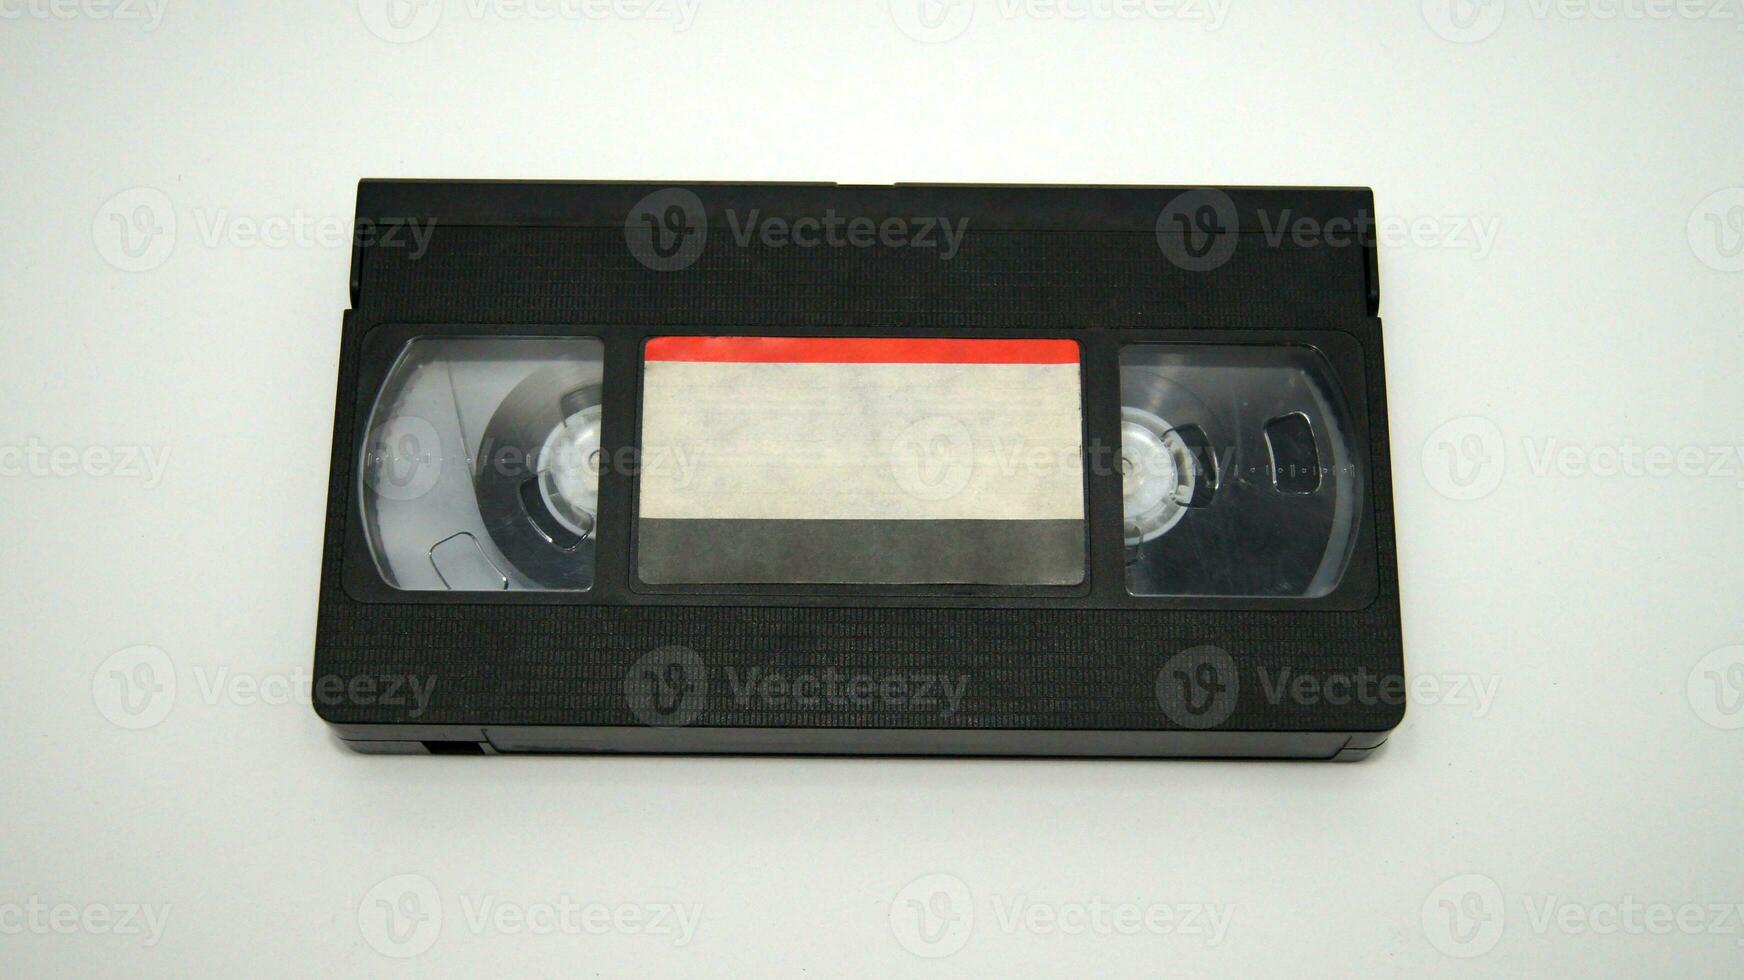 VHS Tape Black Casettee with Film 80's Style photo